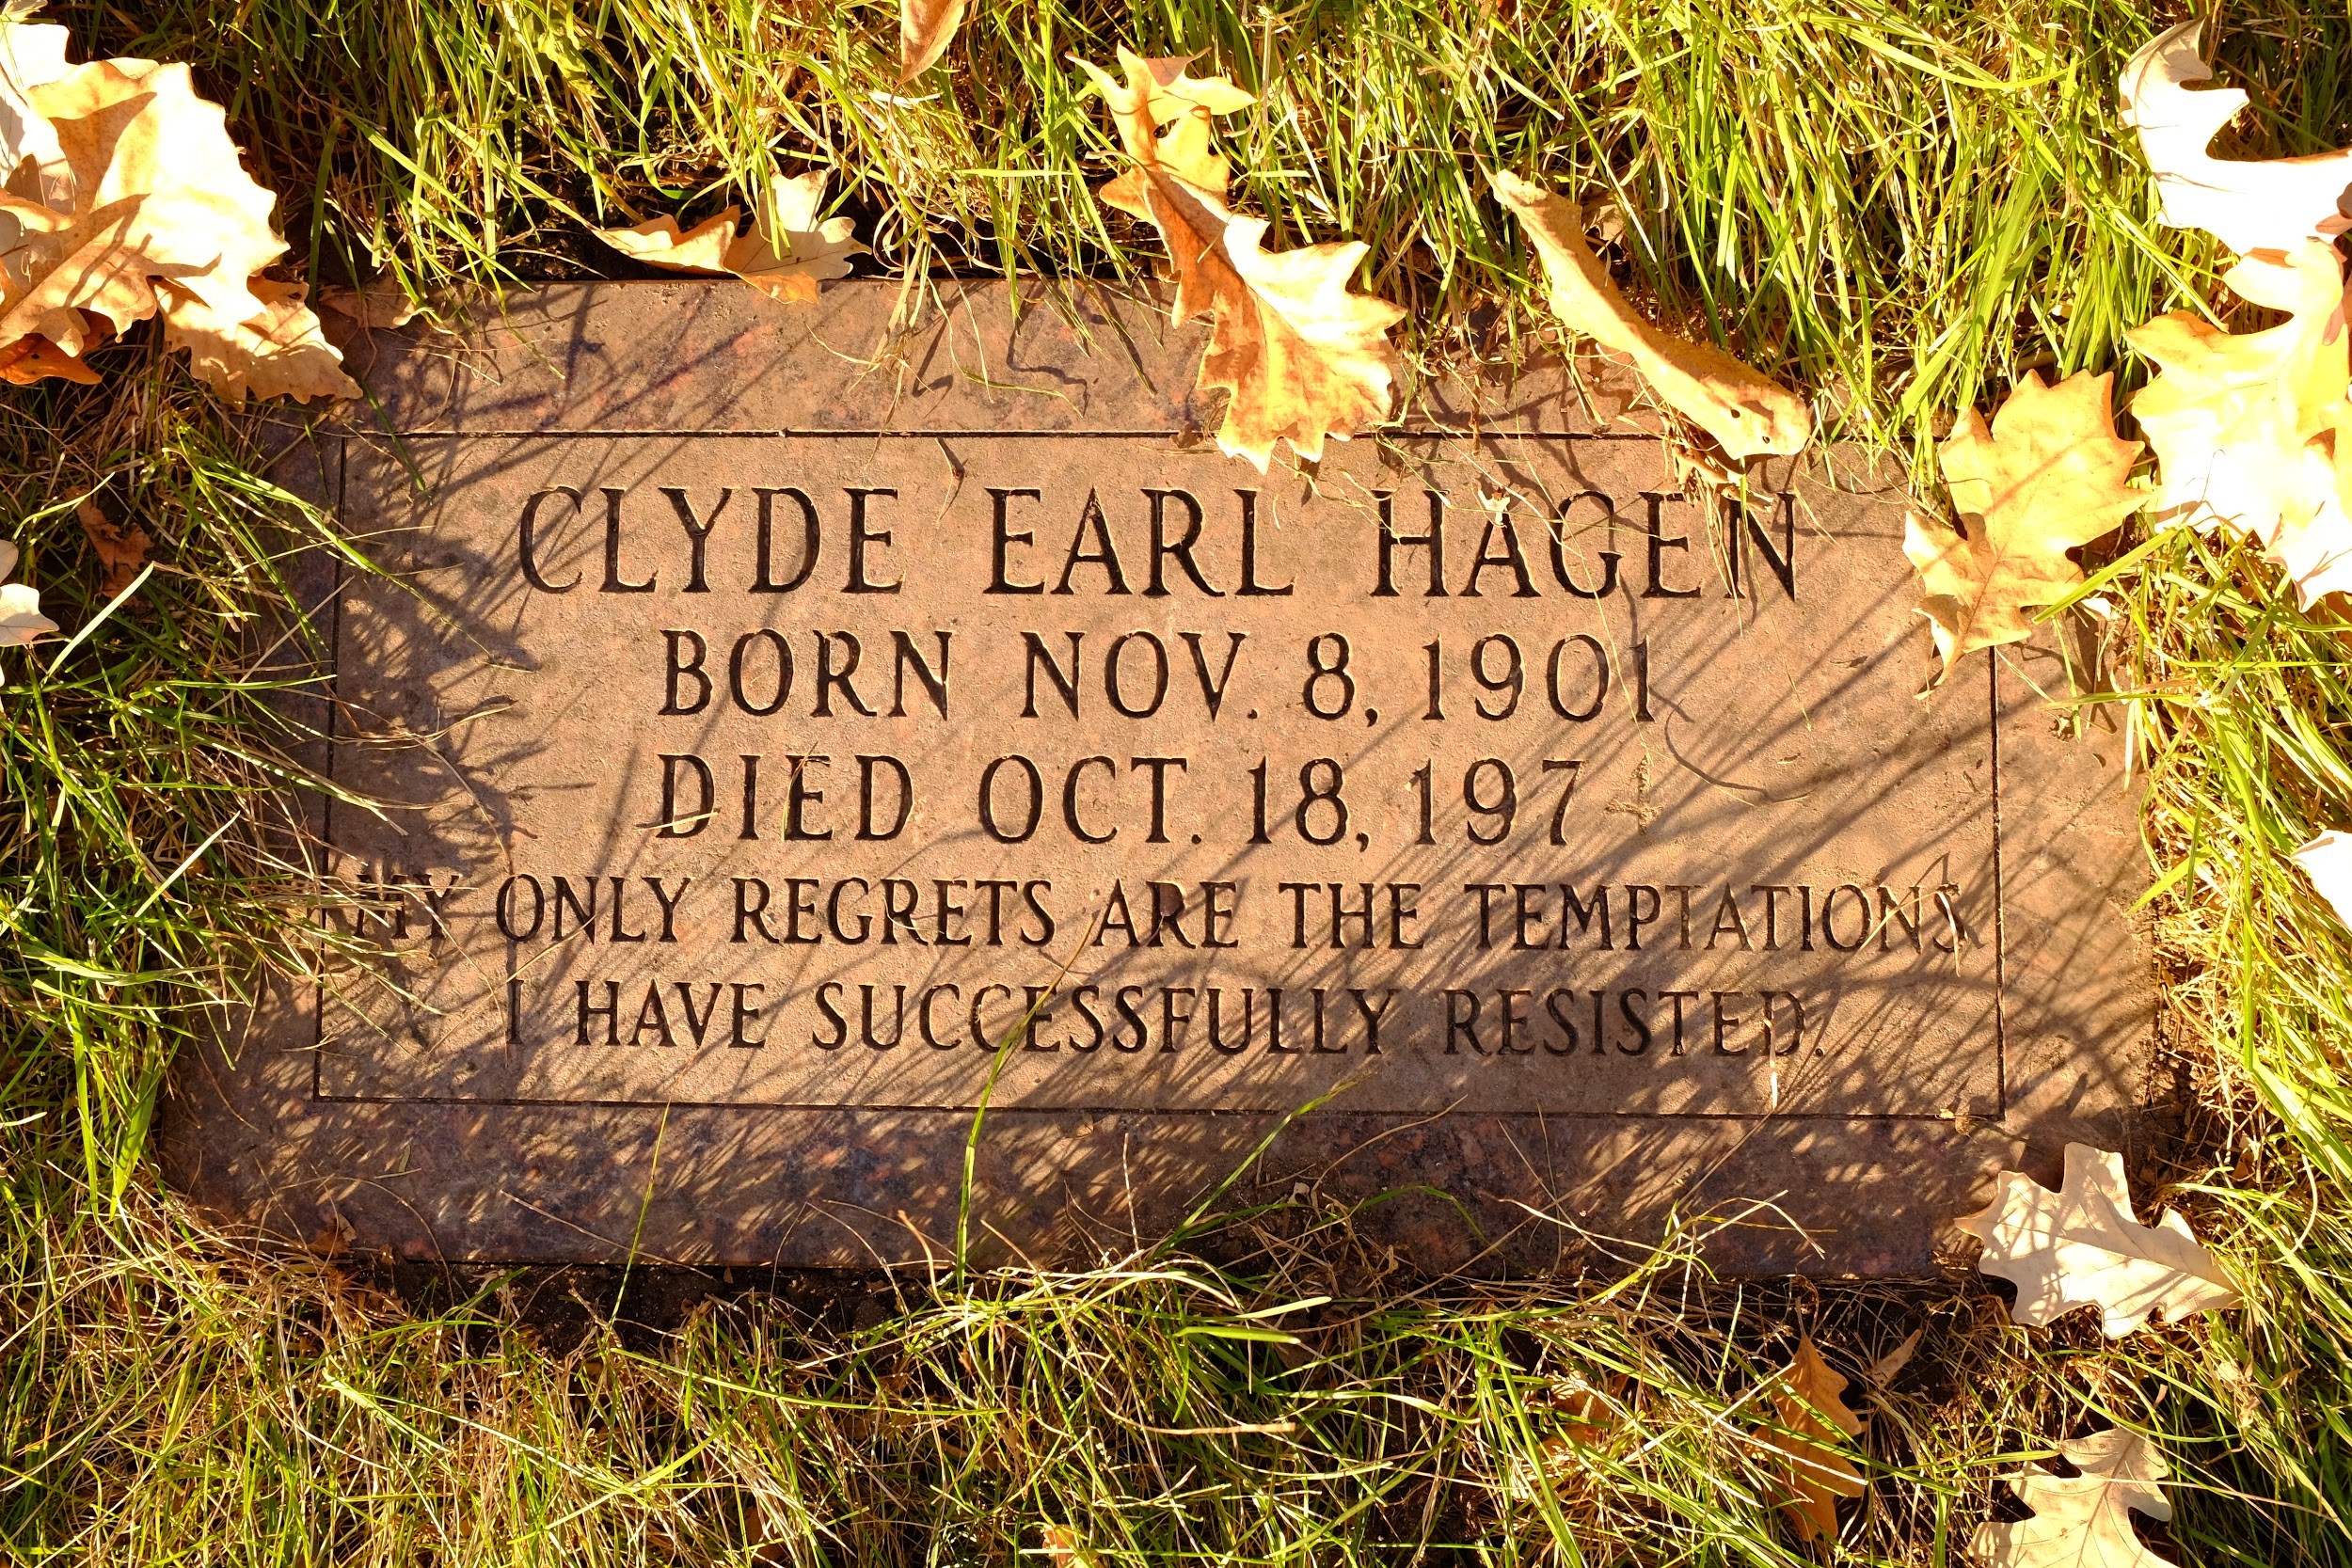 How Epitaphs Have Changed Over Time